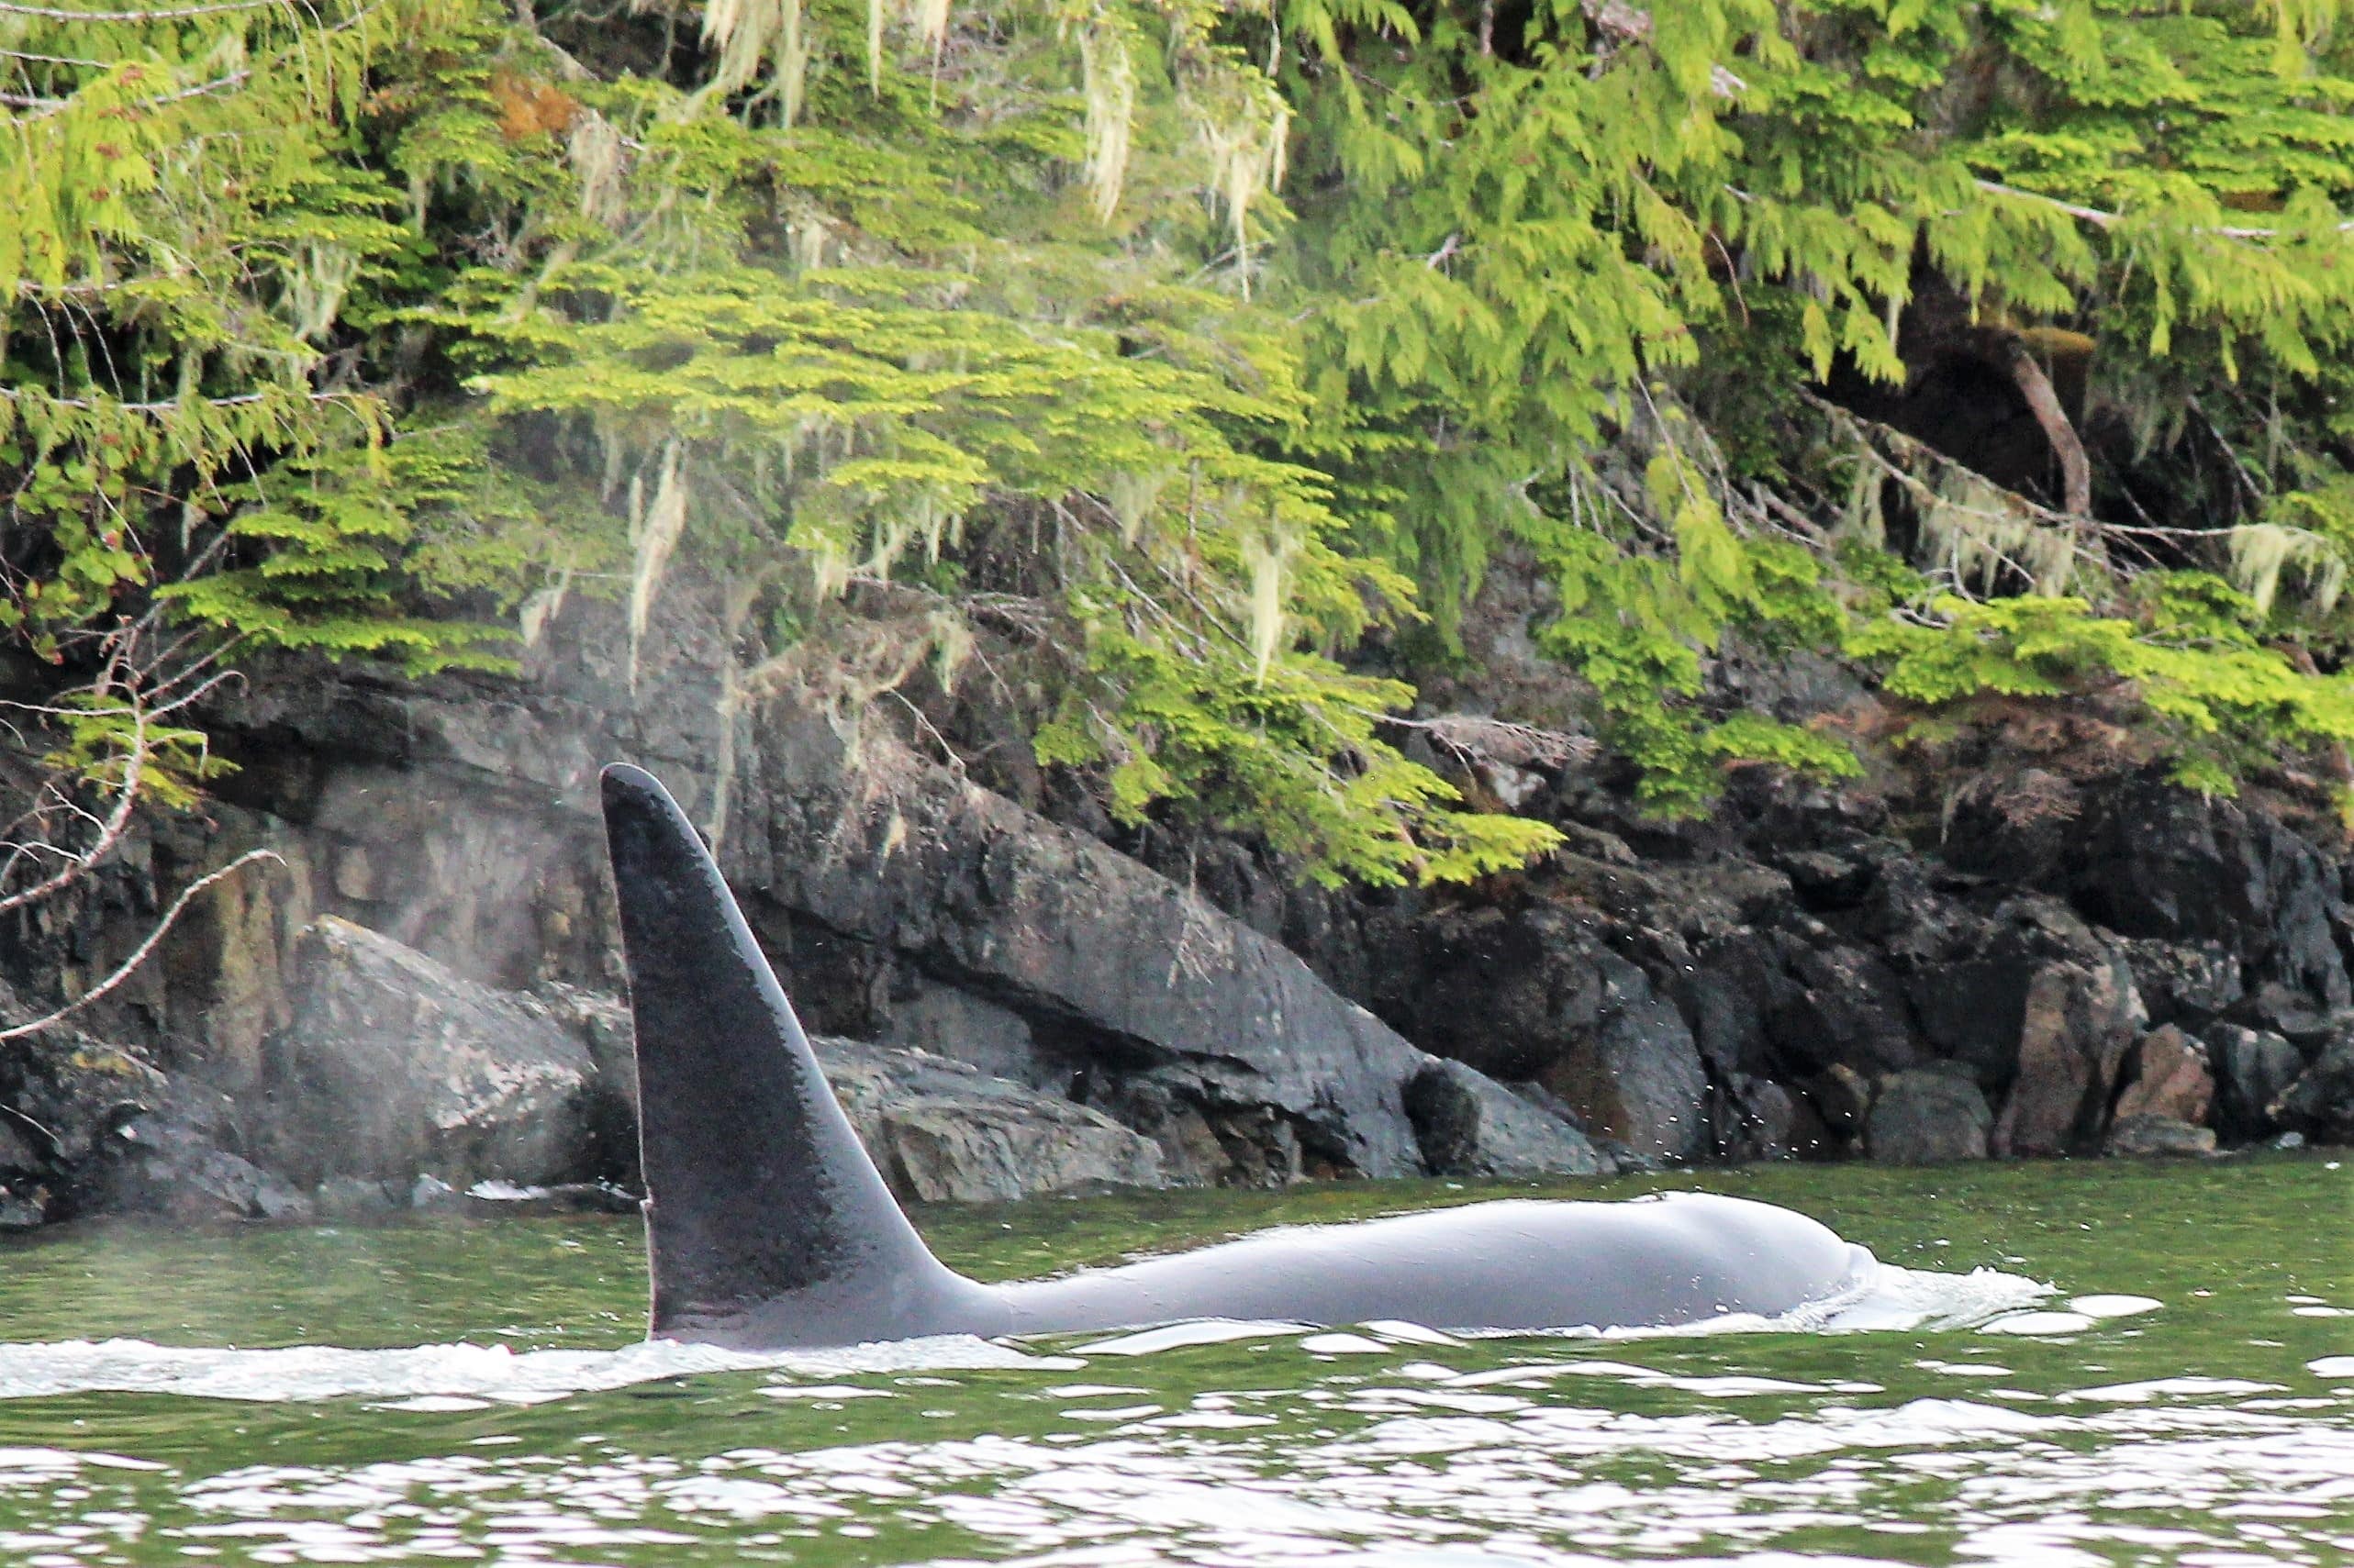 2015-07-04 Orca and Halibut 047 2